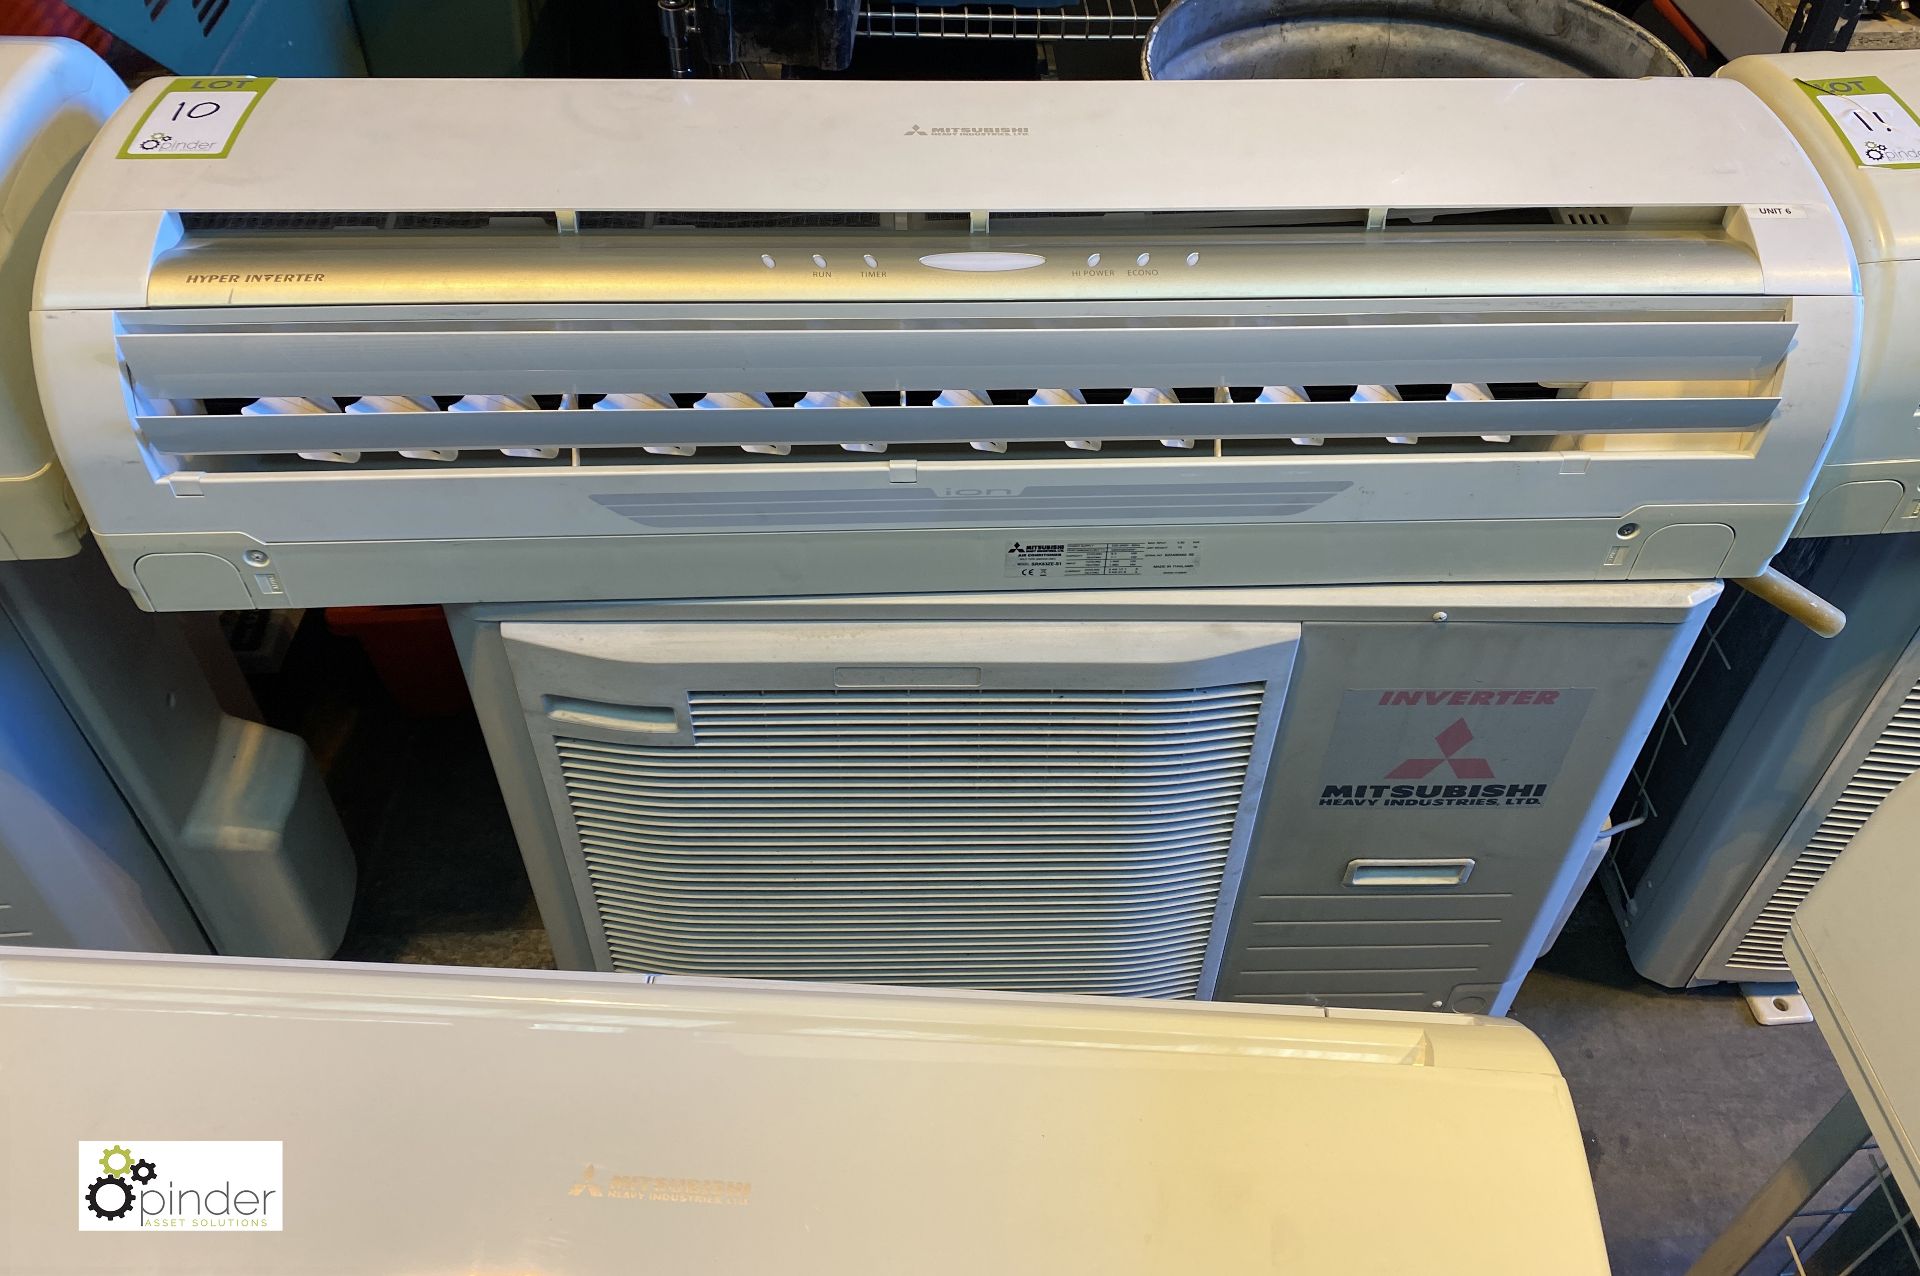 Mitsubishi SRC63ZE-S1 Air Conditioning Unit, with Mitsubishi SRK63ZE-S wall mounted inverter